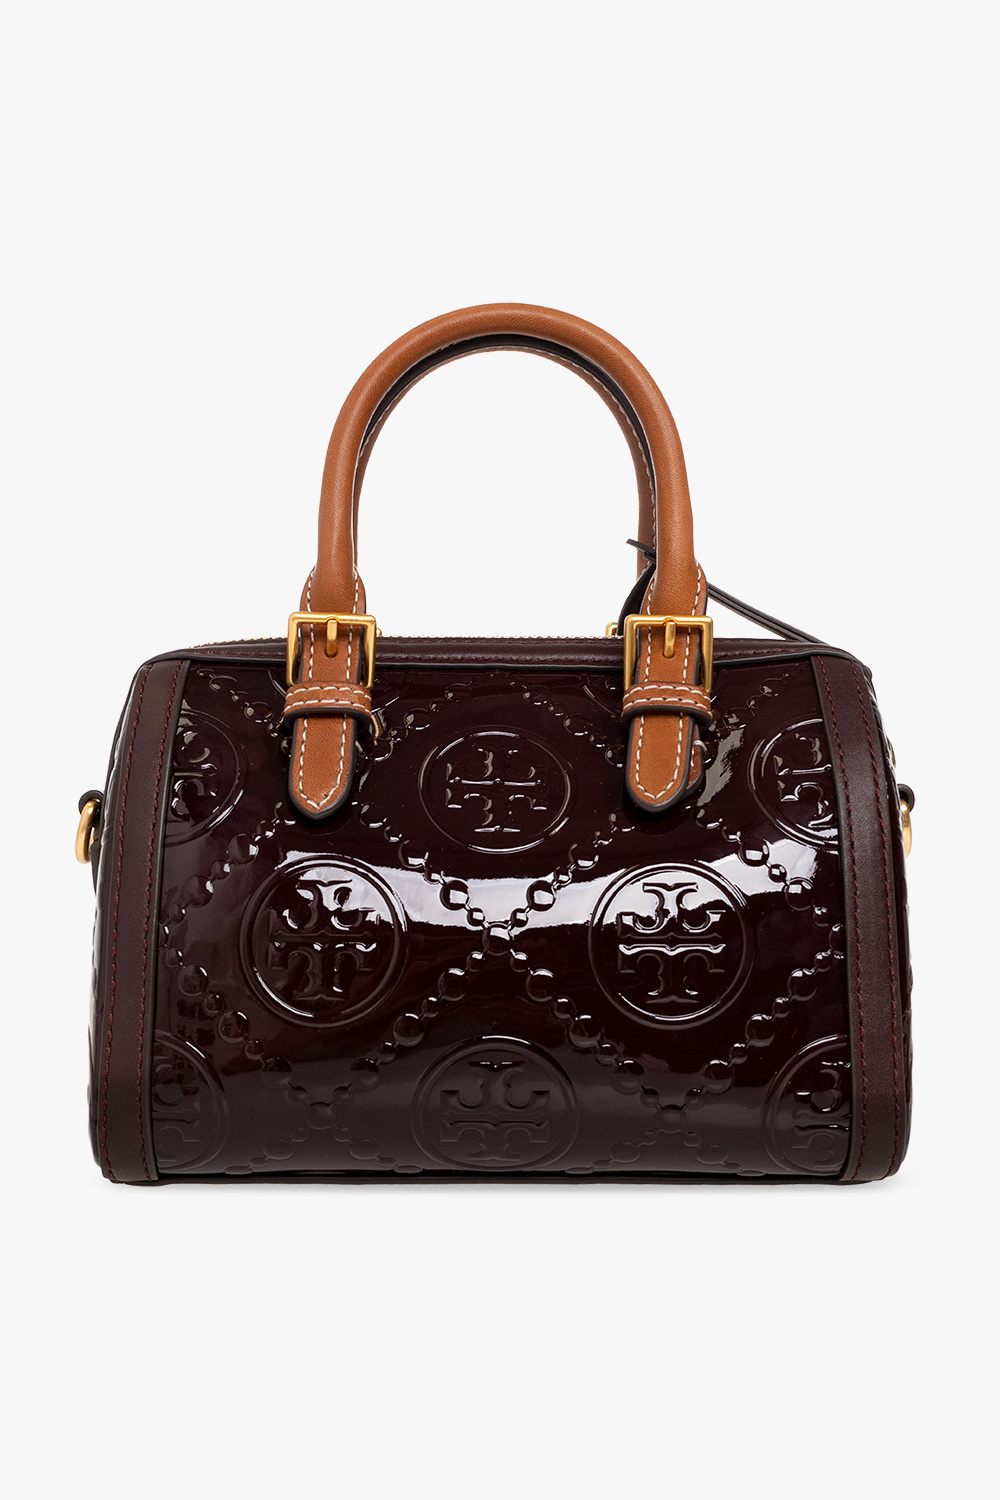 Tory Burch Shoulder bag in patent leather | Women's Bags | Vitkac